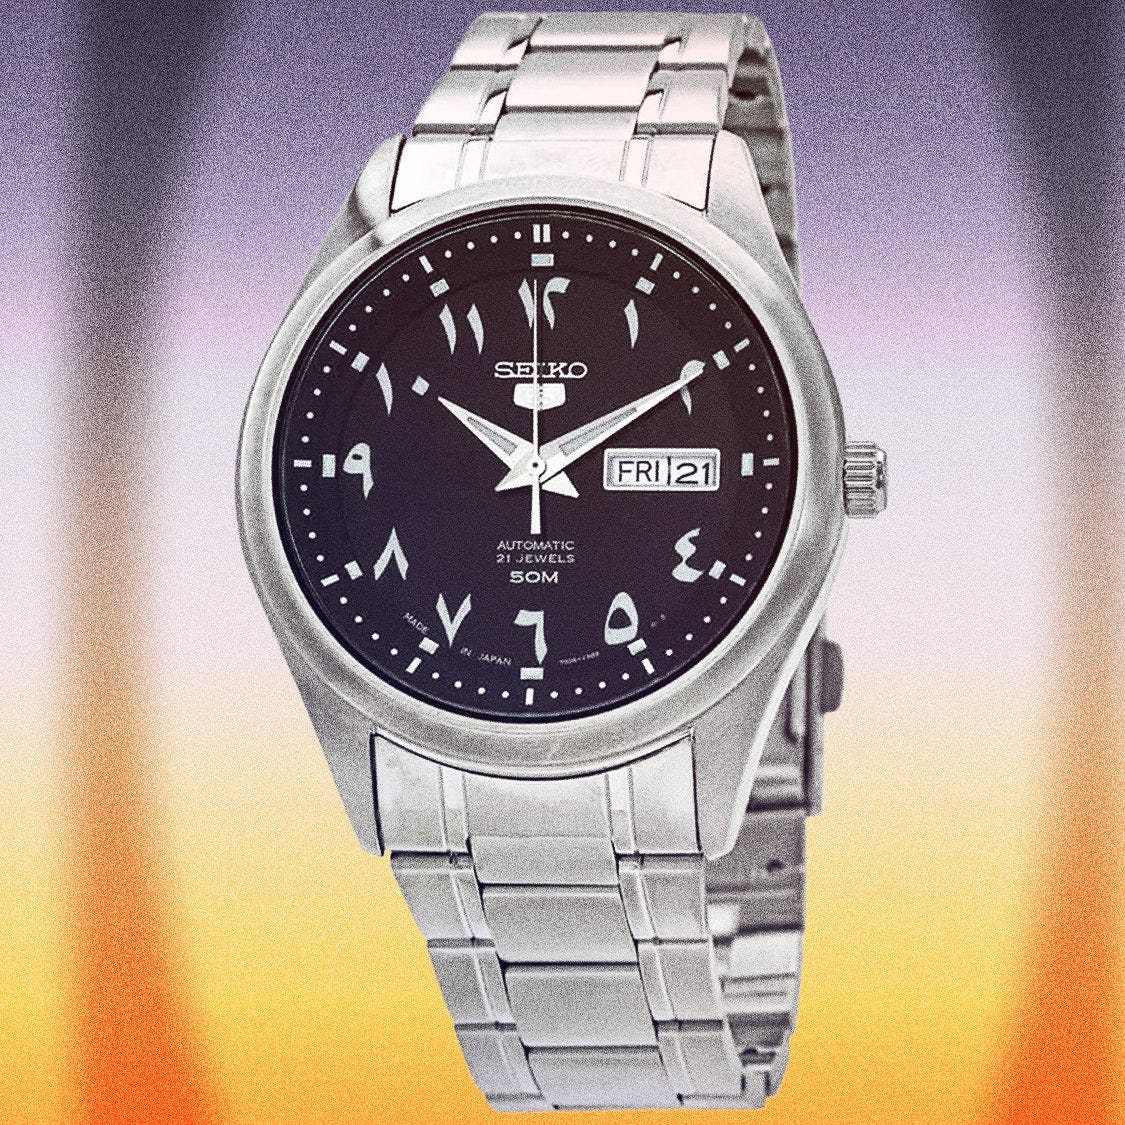 Seiko 5 Arabic Dial Watches Normally Cost Thousands—Not This One | GQ